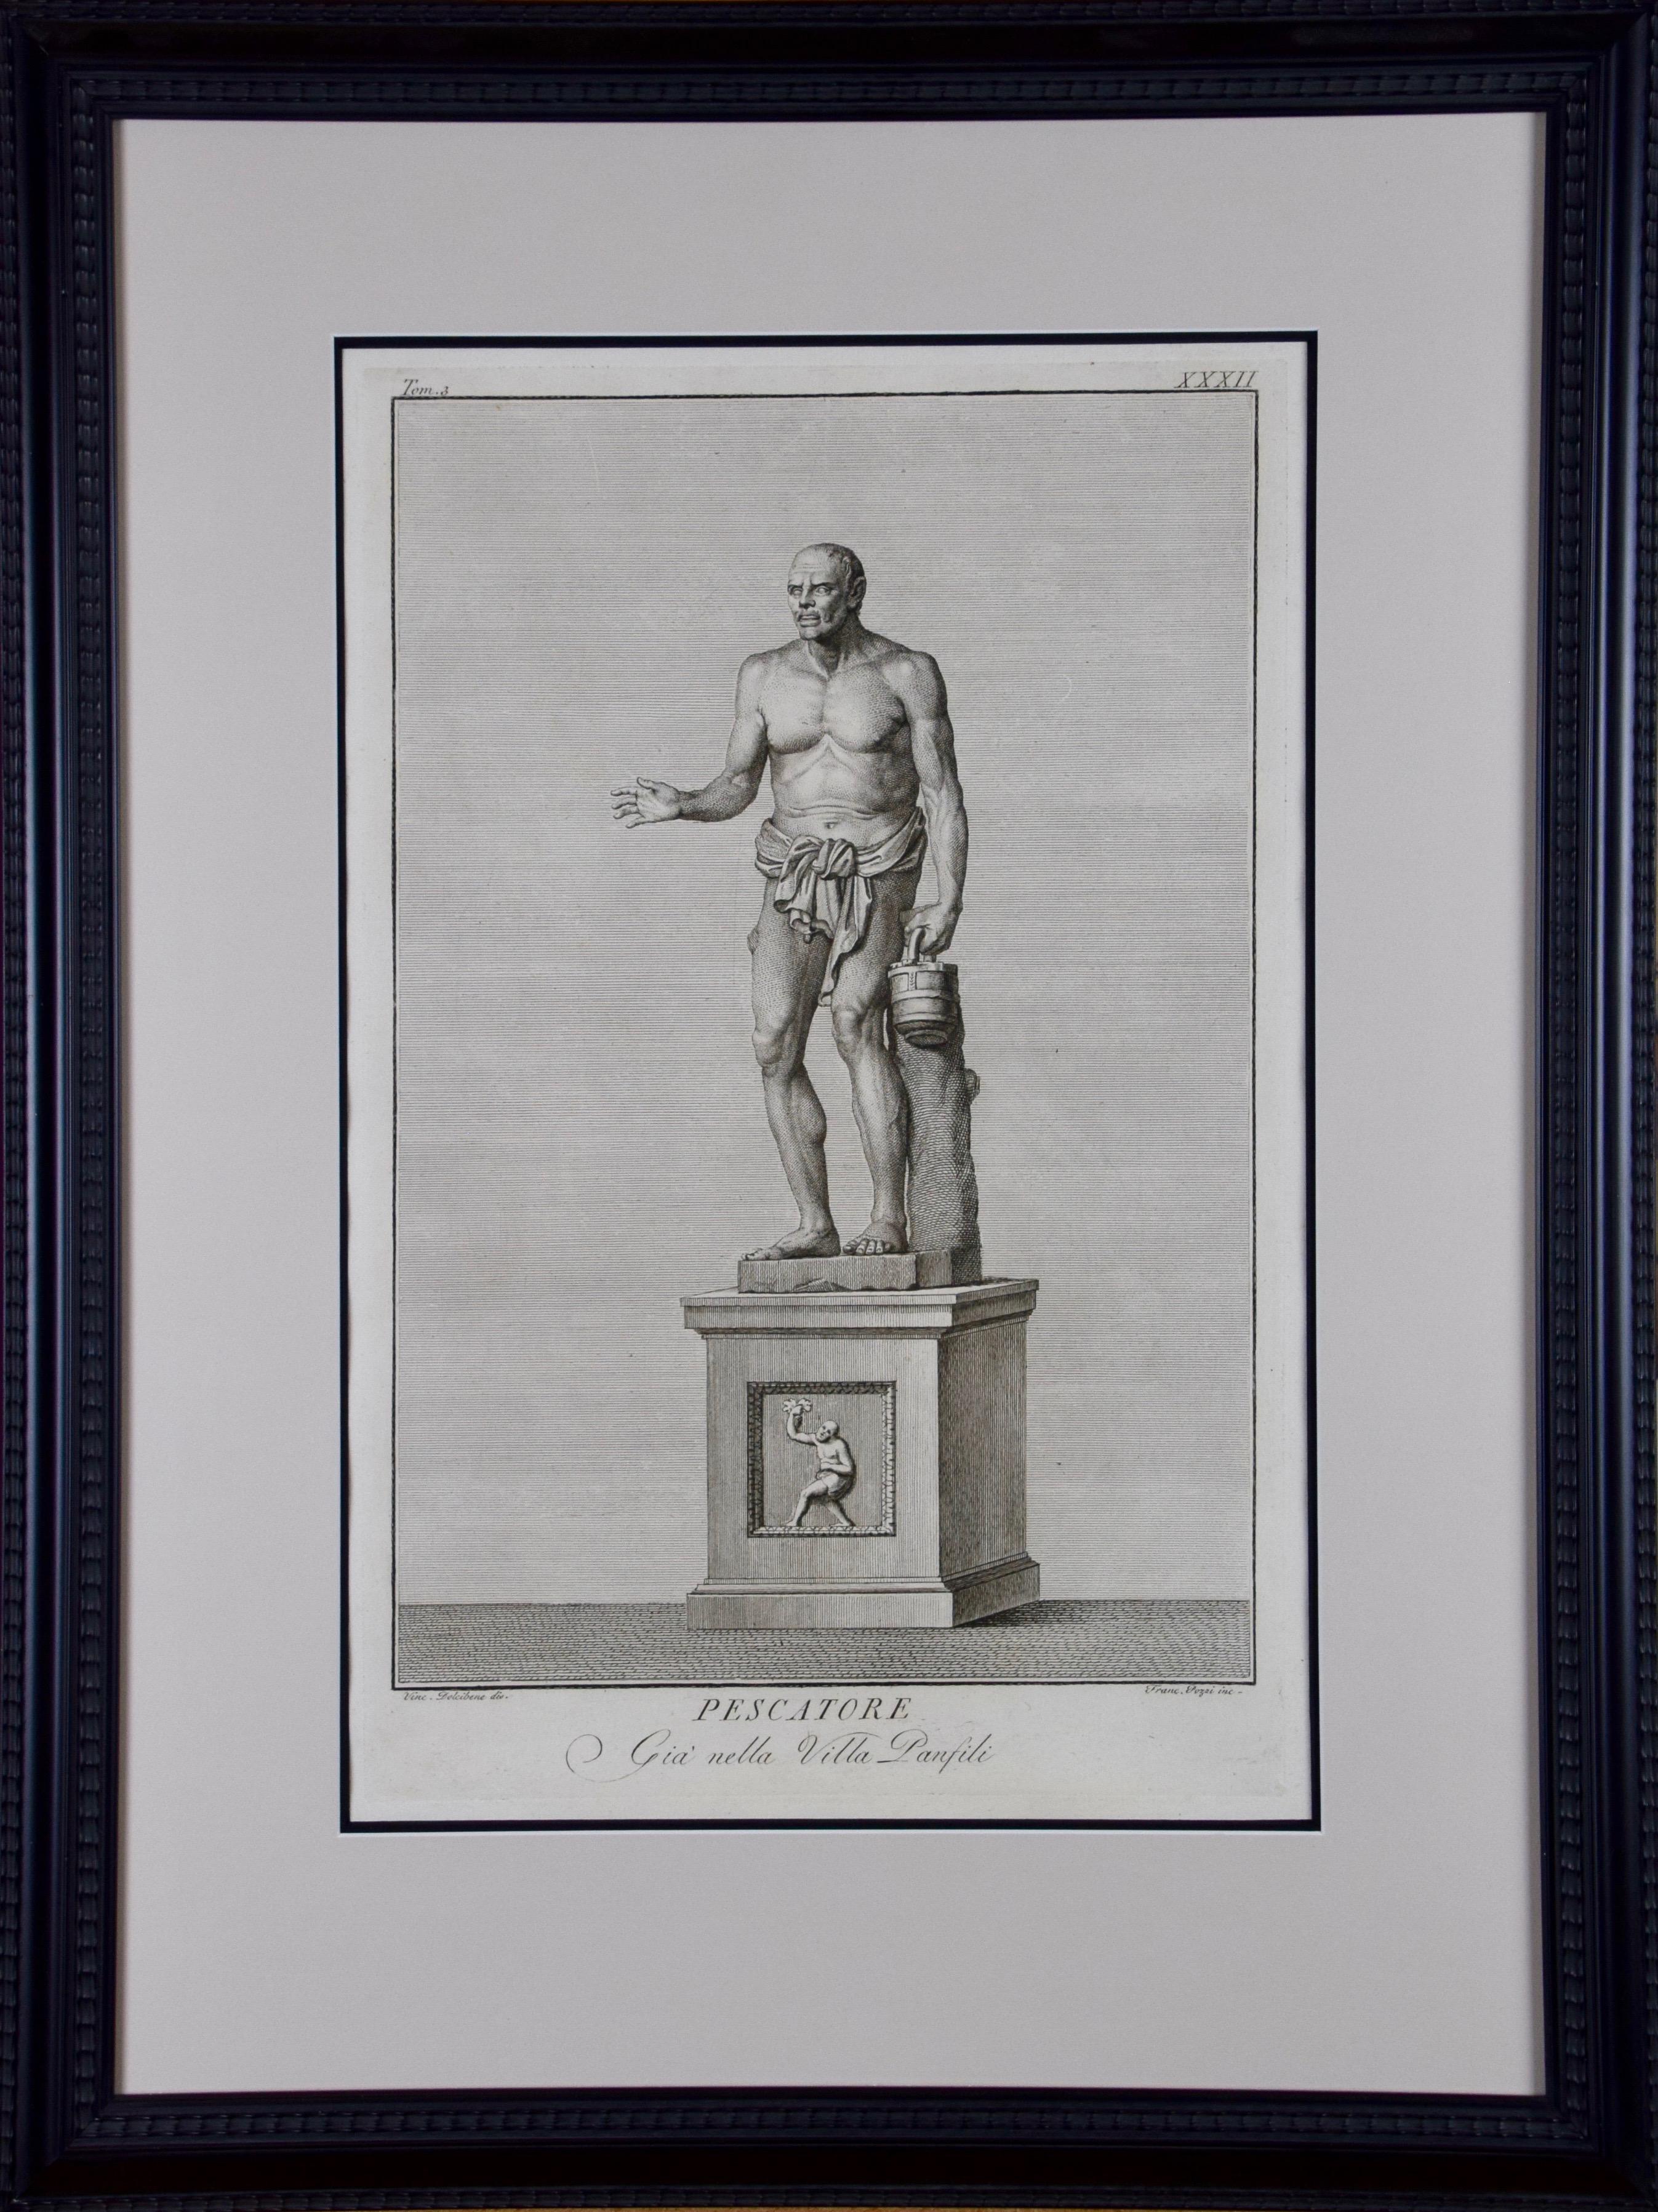 Grouping of Three 18th C. Engravings of Ancient Roman Statues in the Vatican  - Print by Vincenzo Dolcibene